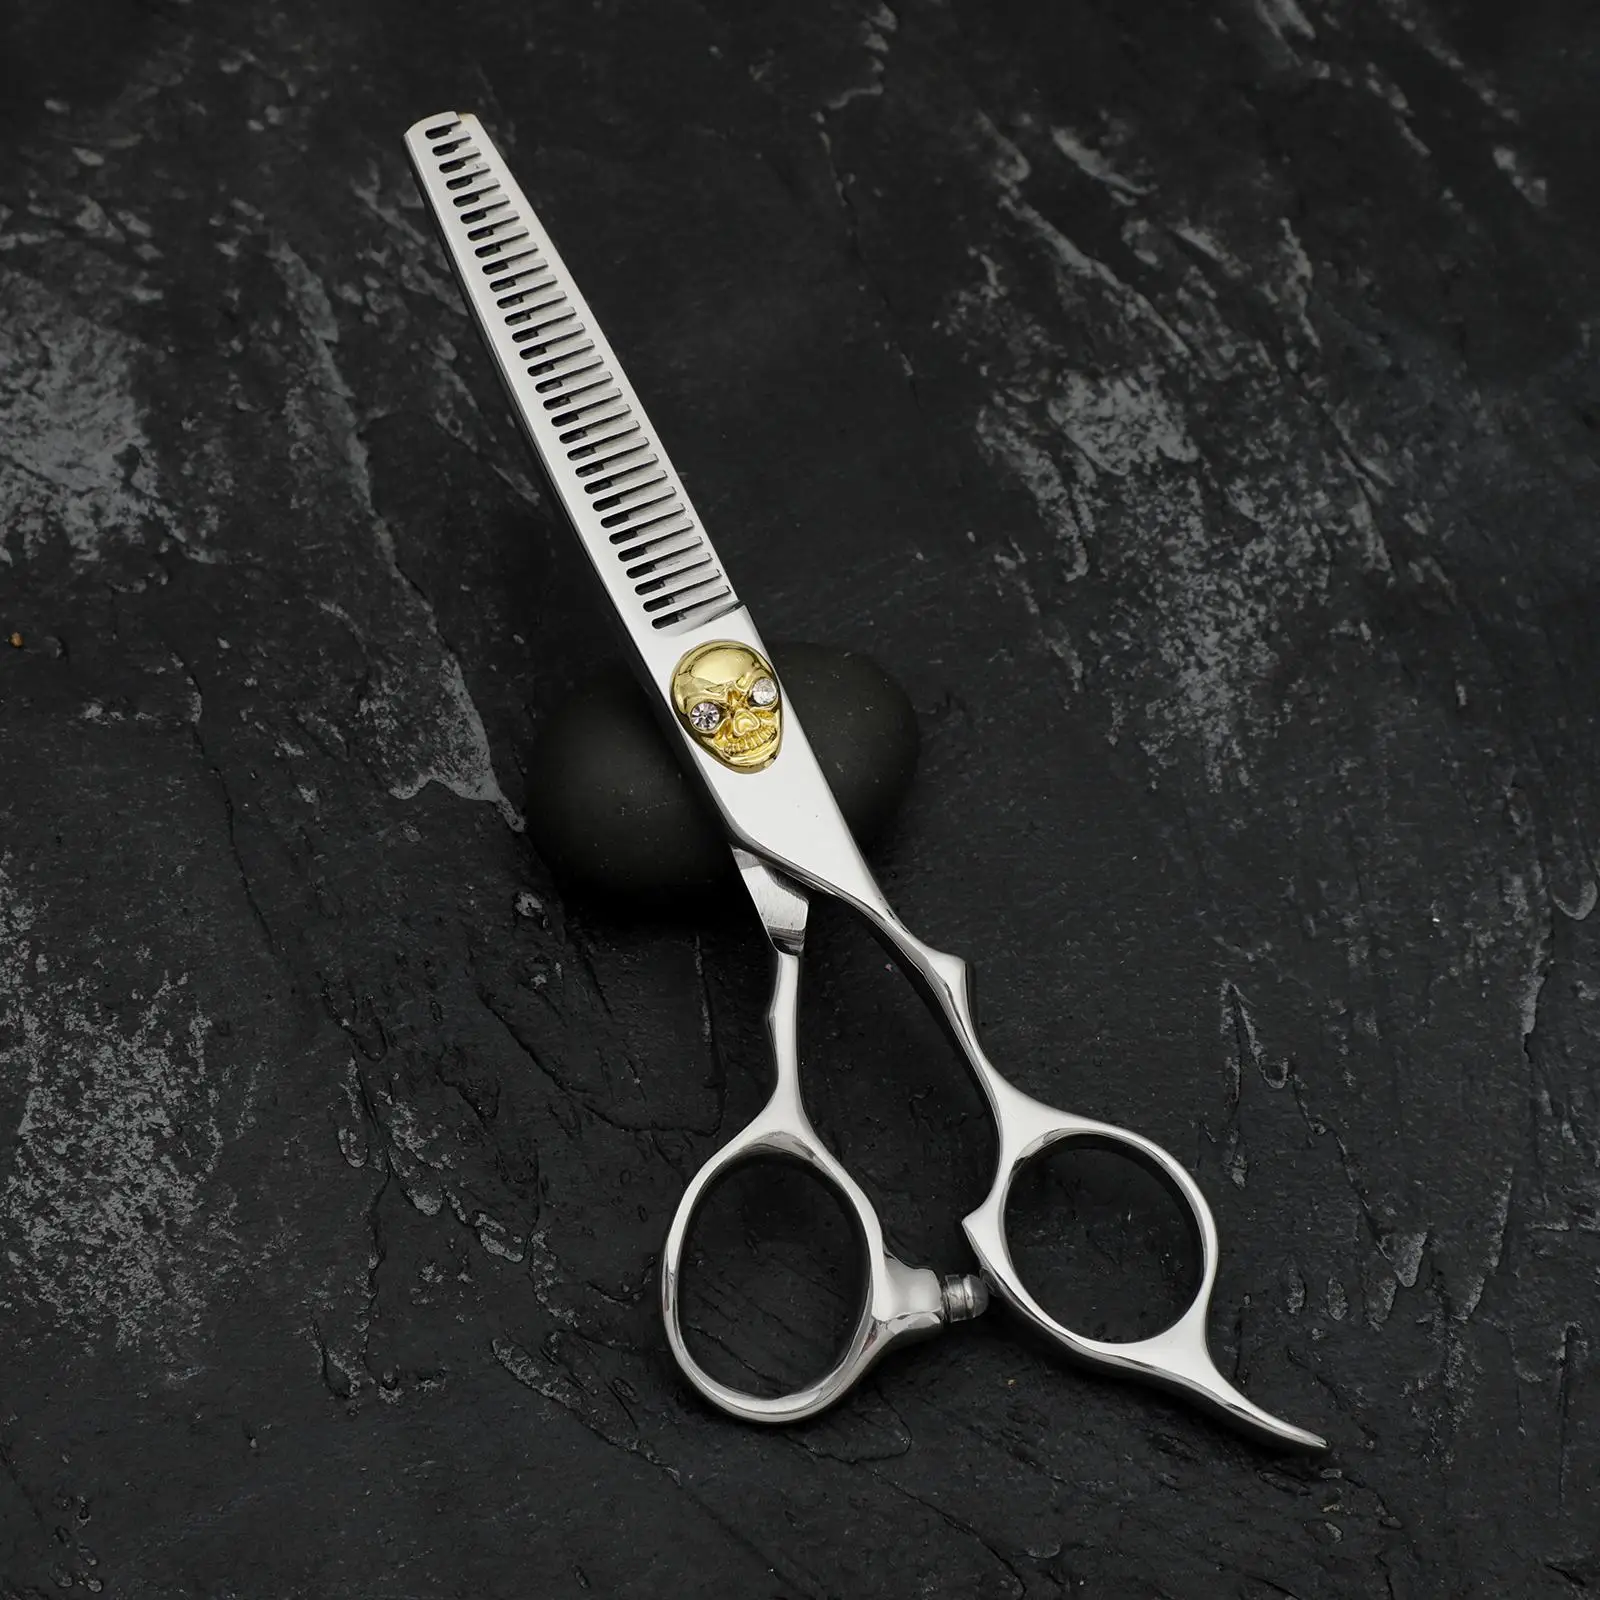 Stainless Steel  Cutting Scissors for stylist  Trimming 15cm